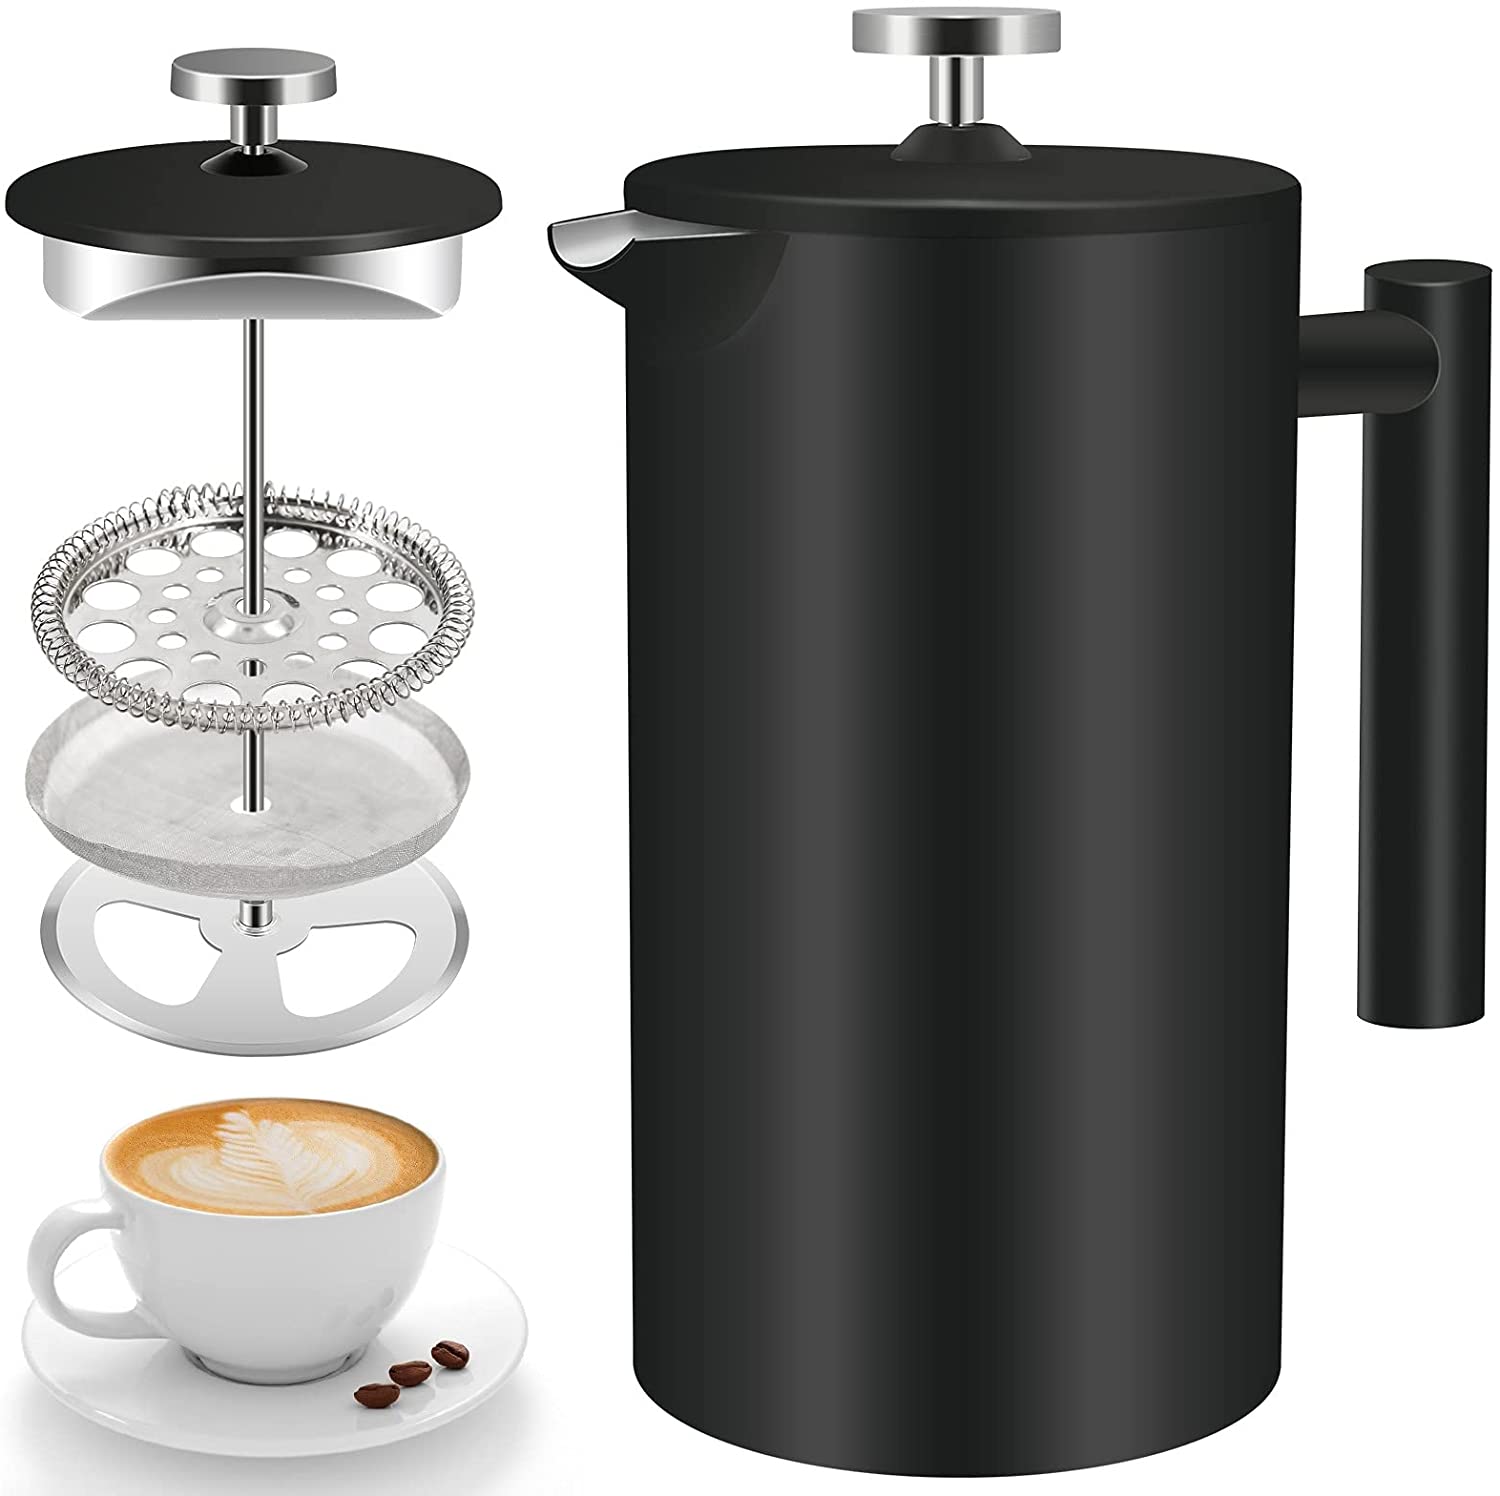 Panda Grip French Press Coffee Press Stainless Steel 1 L Coffee Maker Coffee Press 34 oz Stainless Steel Double-Walled Metal Insulated Coffee Maker with 3-Stage Filter System Espresso and Tea Machine Black 1000 ml